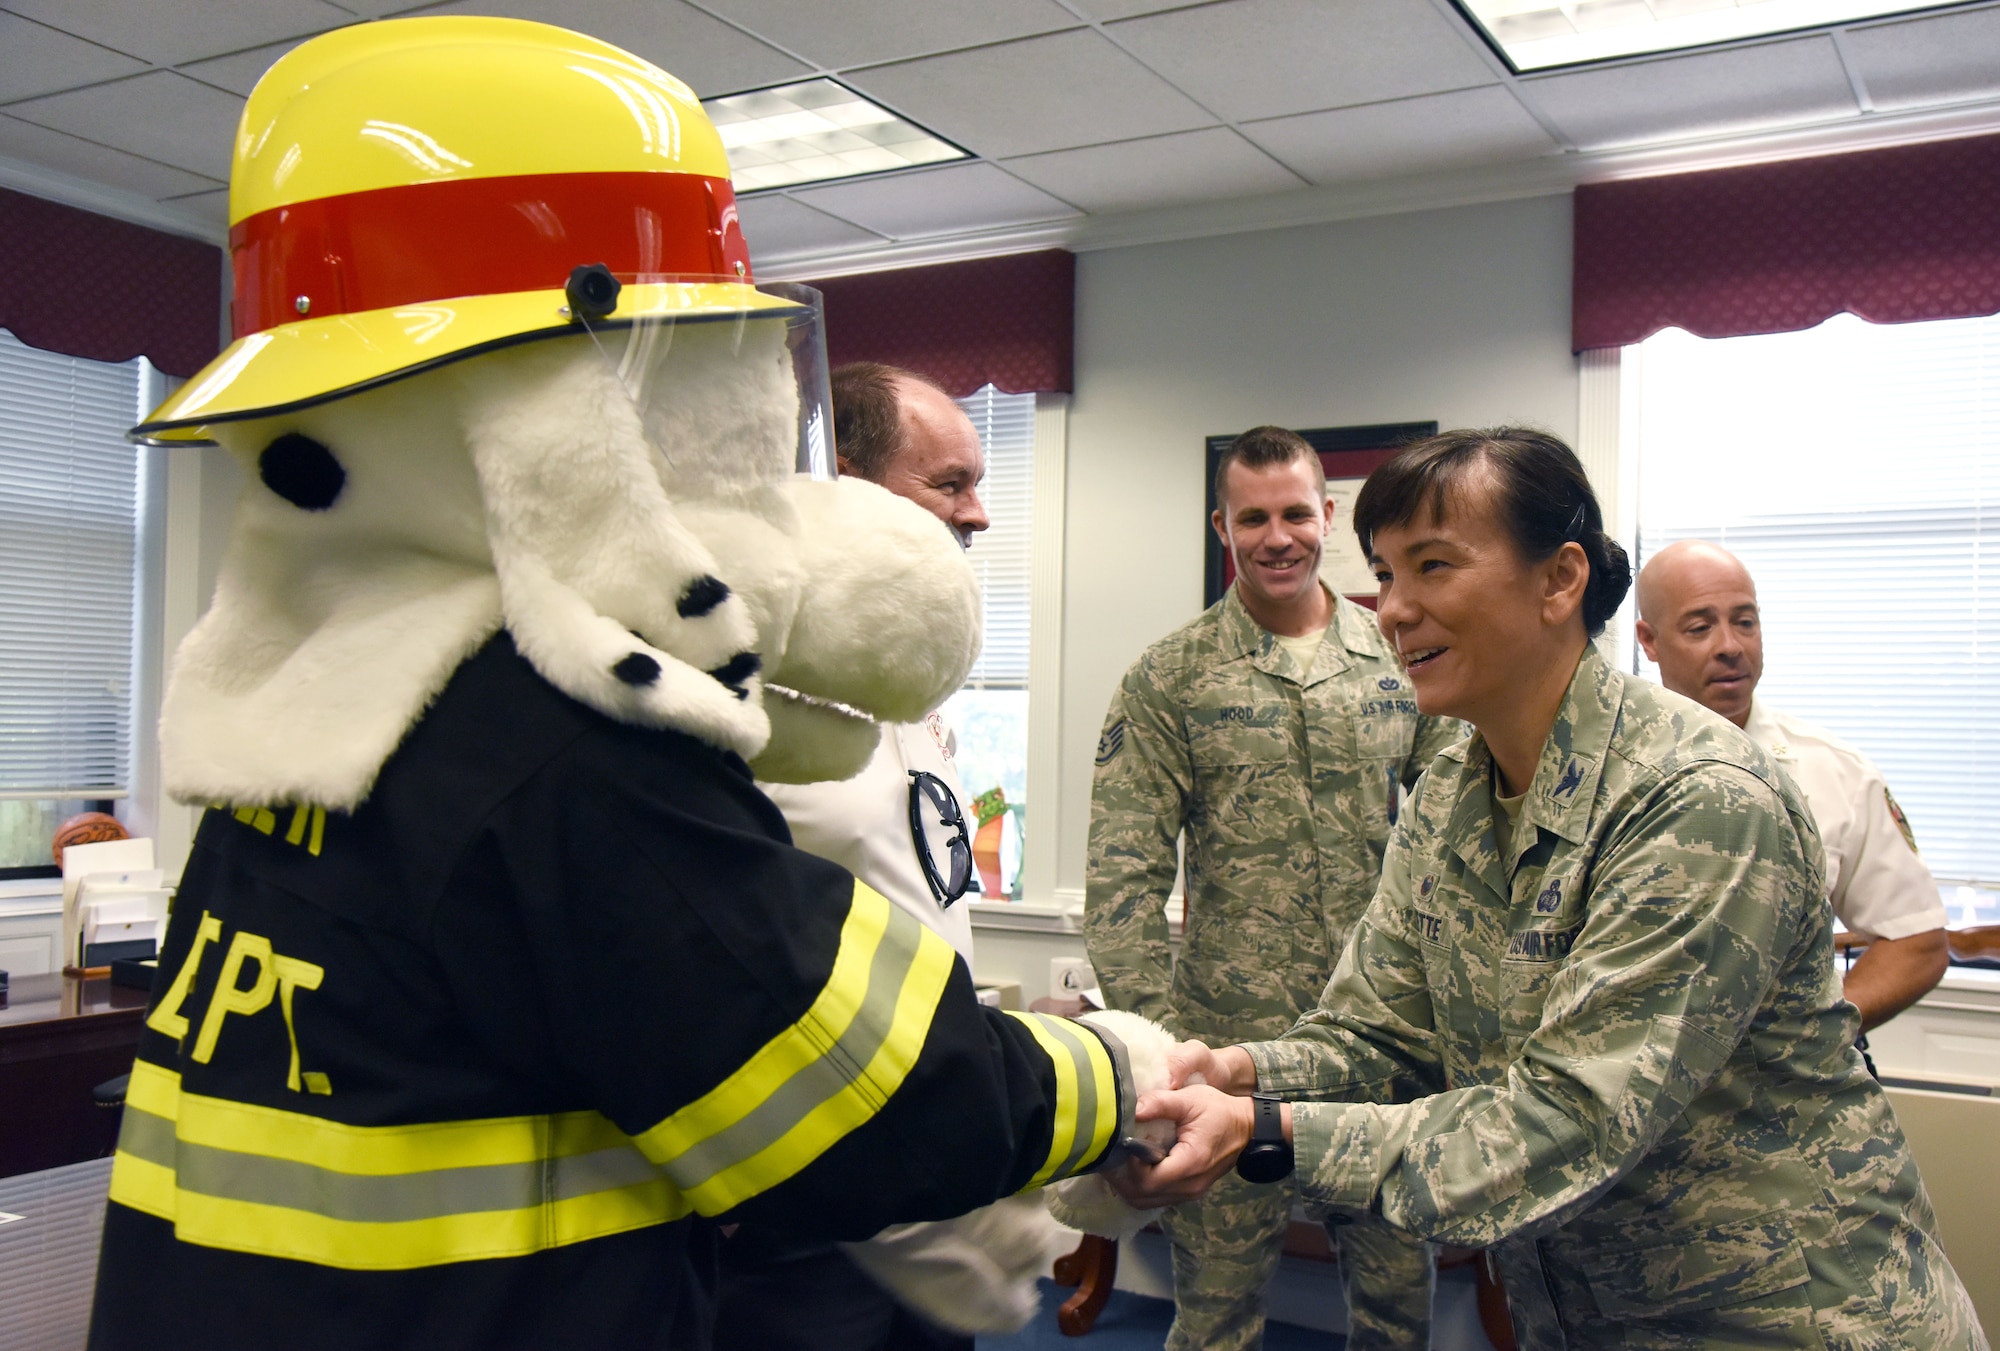 U.S. Air Force Col. Debra Lovette, 81st Training Wing commander, greets Sparky the Fire Dog during the kickoff of Fire Prevention Week at the 81st TRW headquarters building on Keesler Air Force Base, Mississippi, Oct. 9, 2018. The week-long event includes fire drills, literature hand-outs and stove fire demonstrations around the base and concludes with an open house at the fire department Oct. 13. (U.S. Air Force photo by Kemberly Groue)